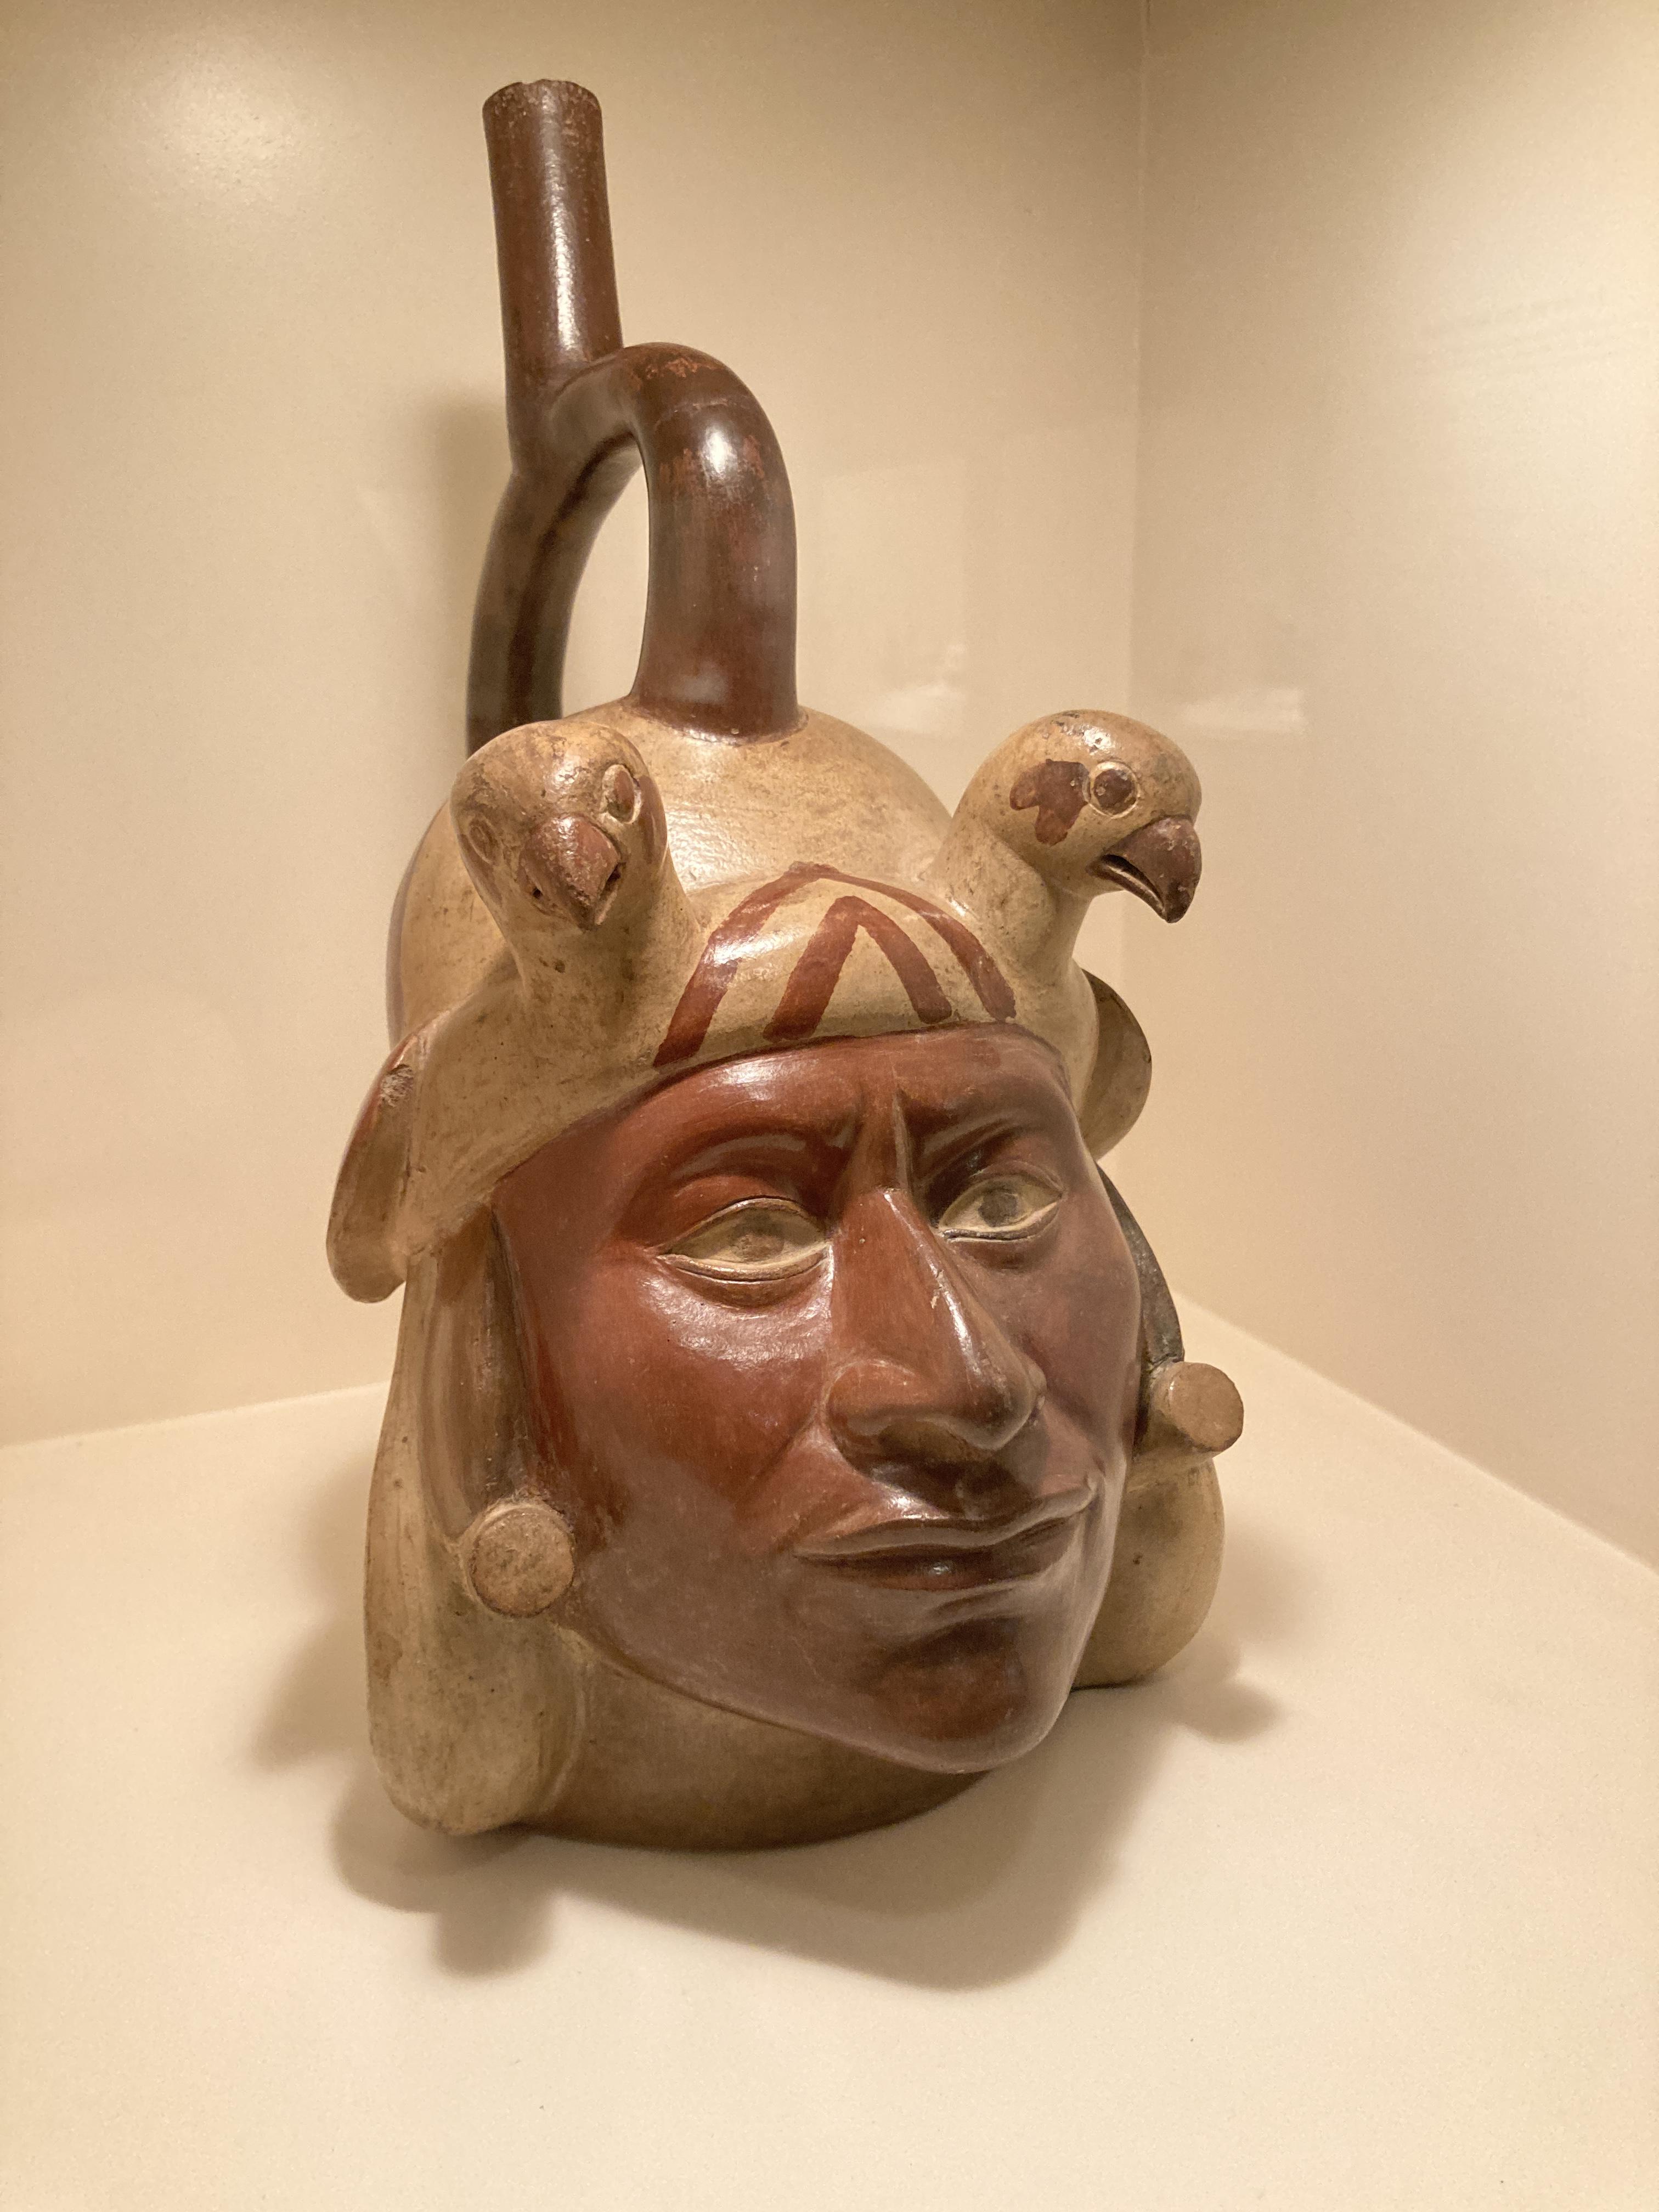 Moche portrait vessel, 600AD - these kinds of artifacts are one of the Pre-Hispanic Americas' few naturalistic portraiture traditions.jpg